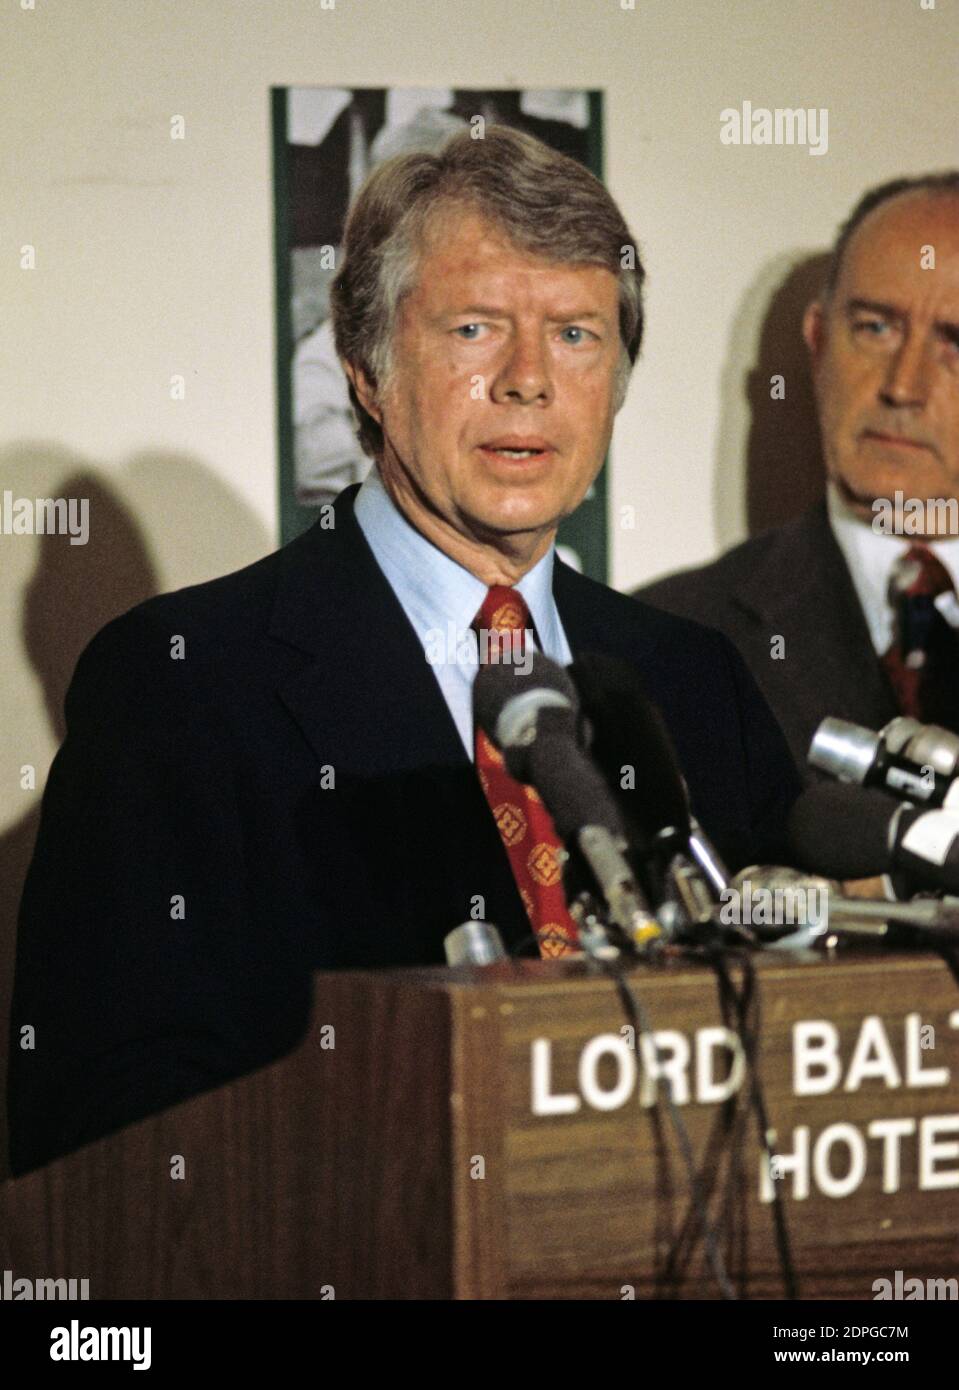 Governor Jimmy Carter (Democrat of Georgia) a candidate for the 1976 Democratic nomination for President of the United States, makes a campaign appearance in Baltimore, Maryland on May 13, 1976. Standing at right is Mayor William Donald Schaefer (Democrat of Baltimore). Photo by Arnie Sachs/CNP/ABACAPRESS.COM Stock Photo